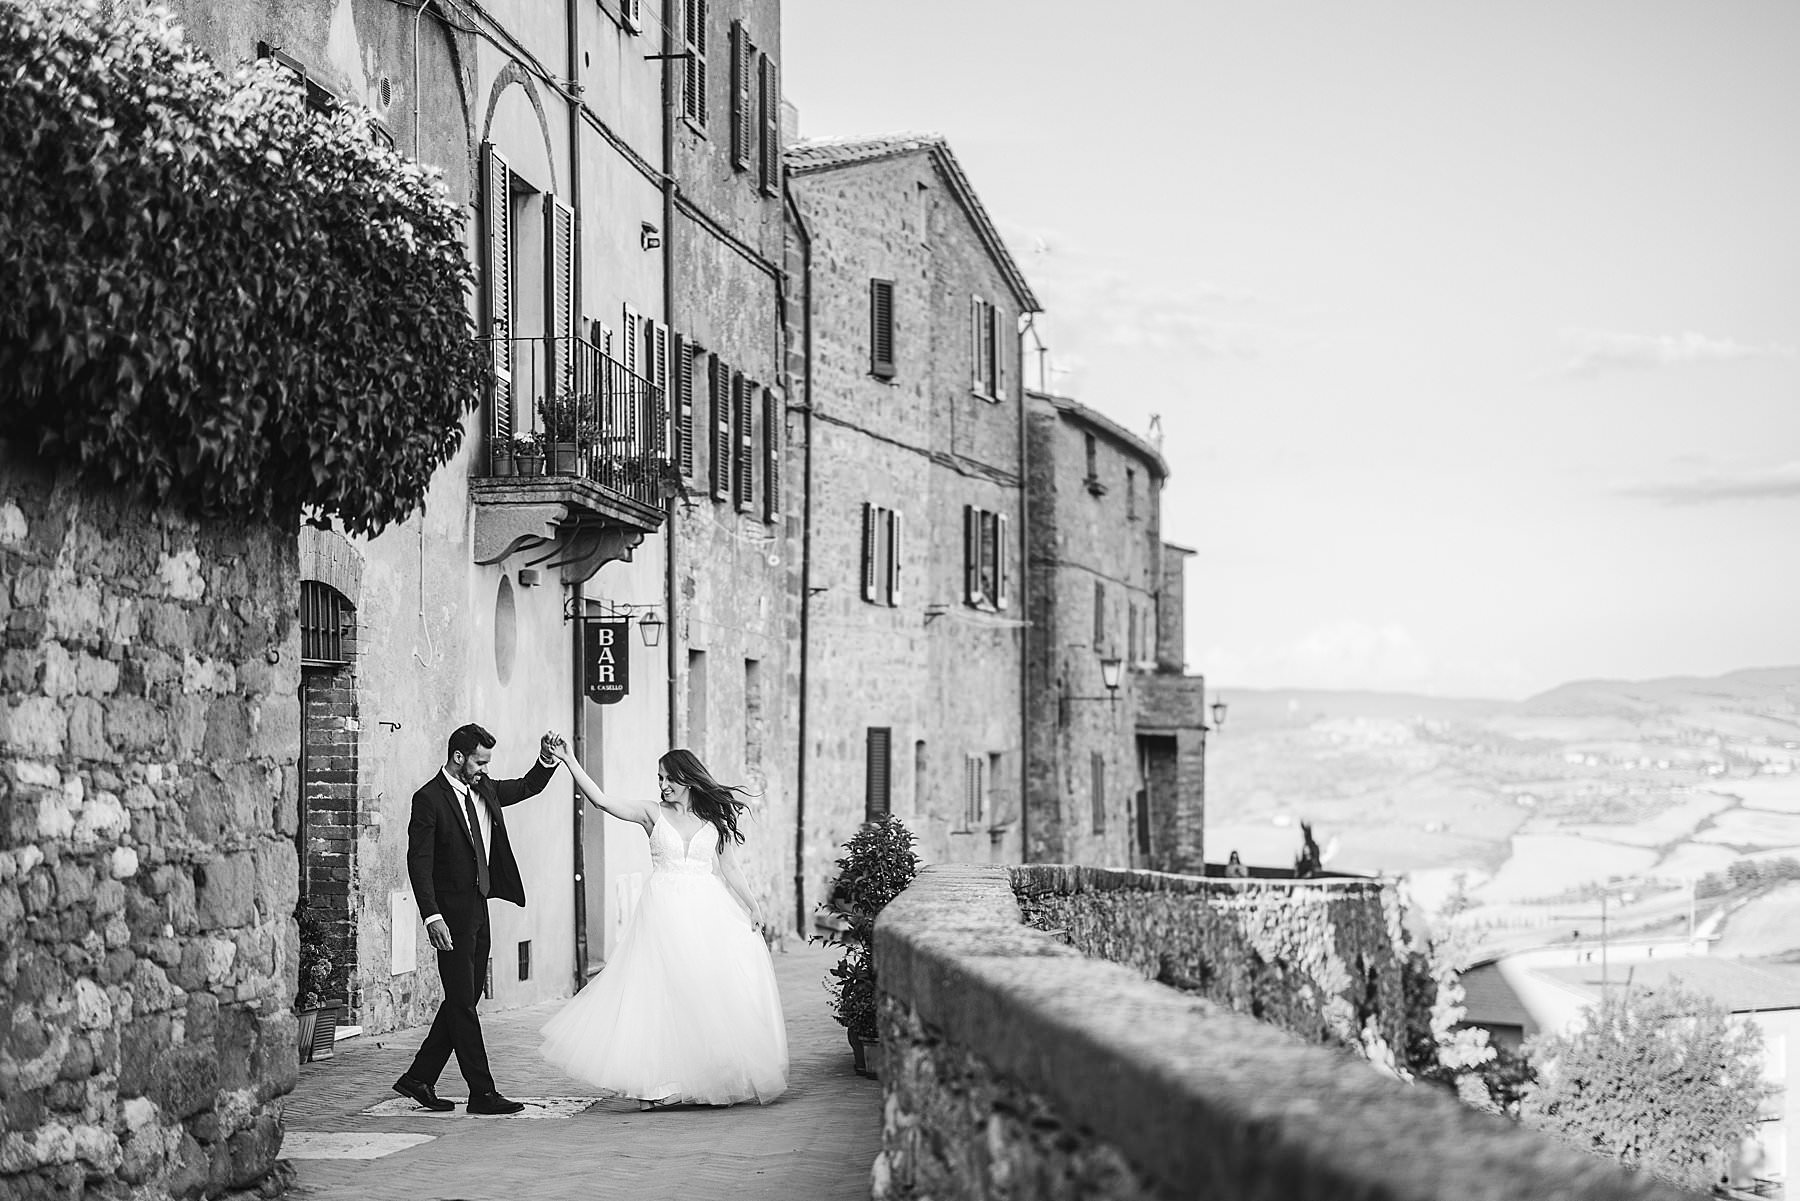 Exciting wedding photo in Pienza the heart of Val d’Orcia for intimate destination elopement